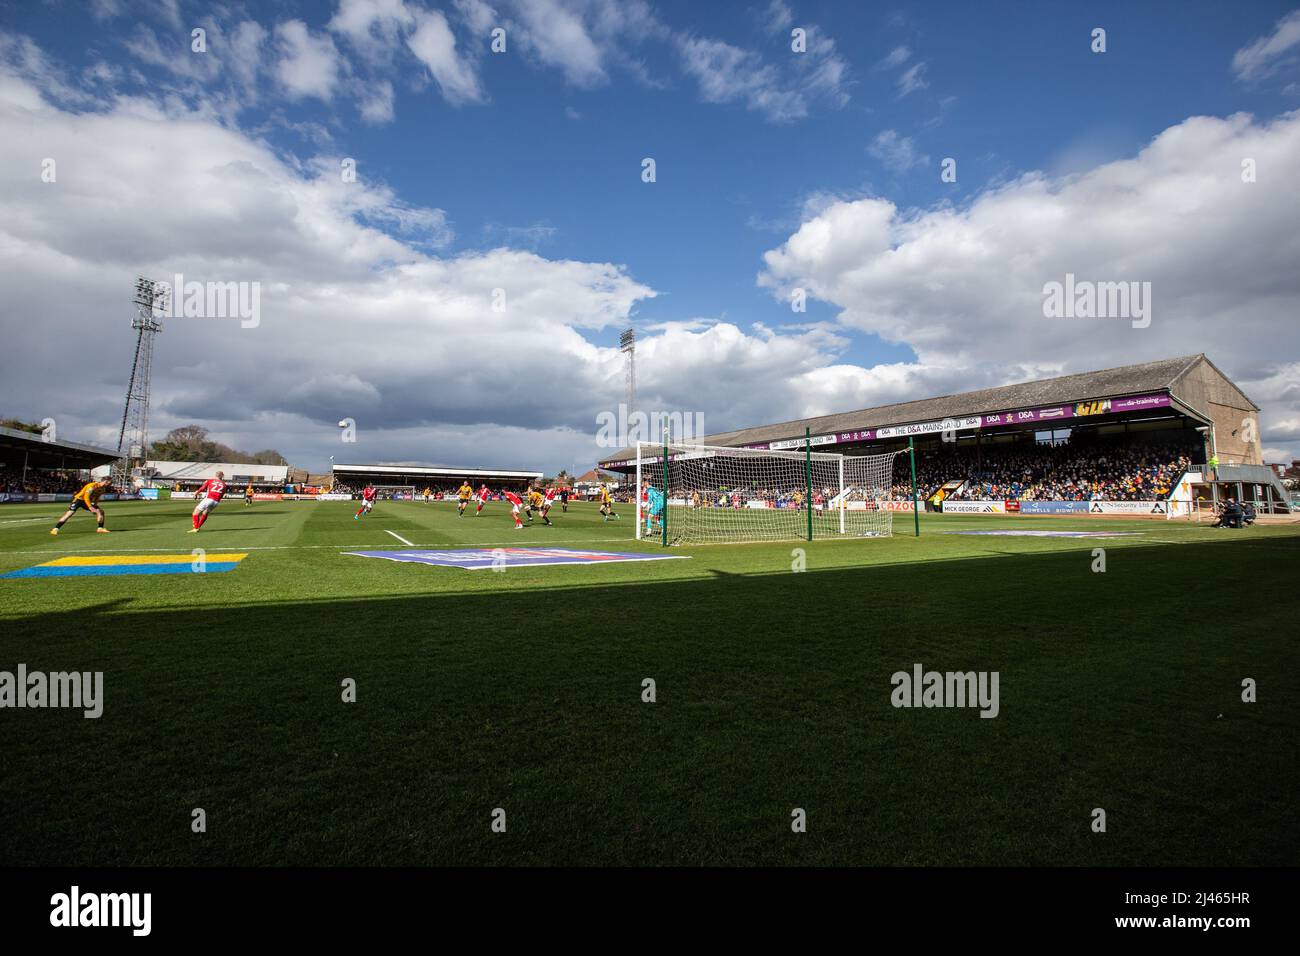 General view of The Abbey Stadium home of Cambridge United Football Club during match on sunny day Stock Photo